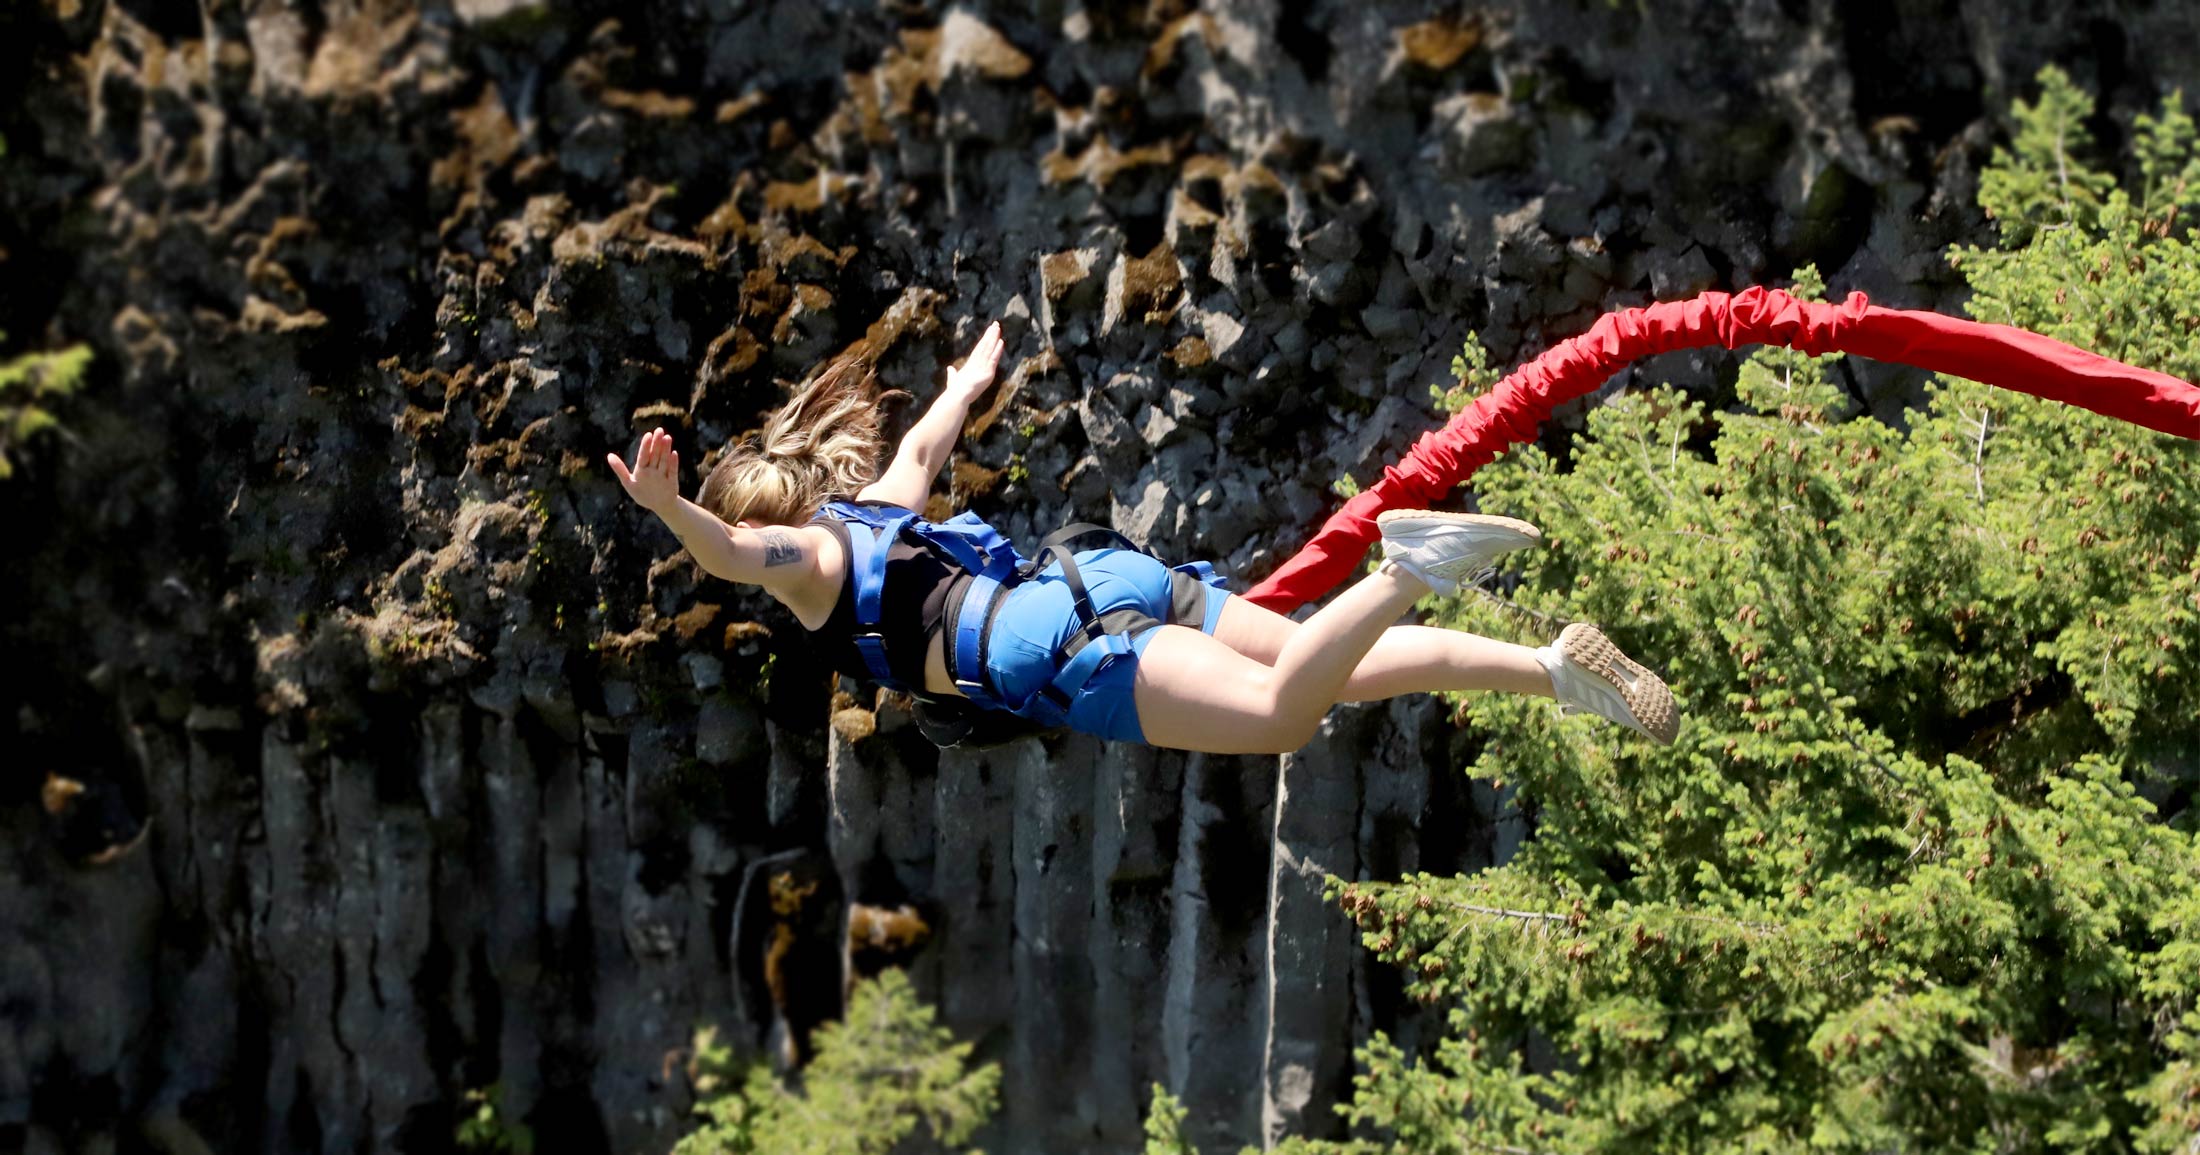 Mackenzie Wensauer bungee jumps with her arms spread out into a rocky canyone on Vancouver Island.